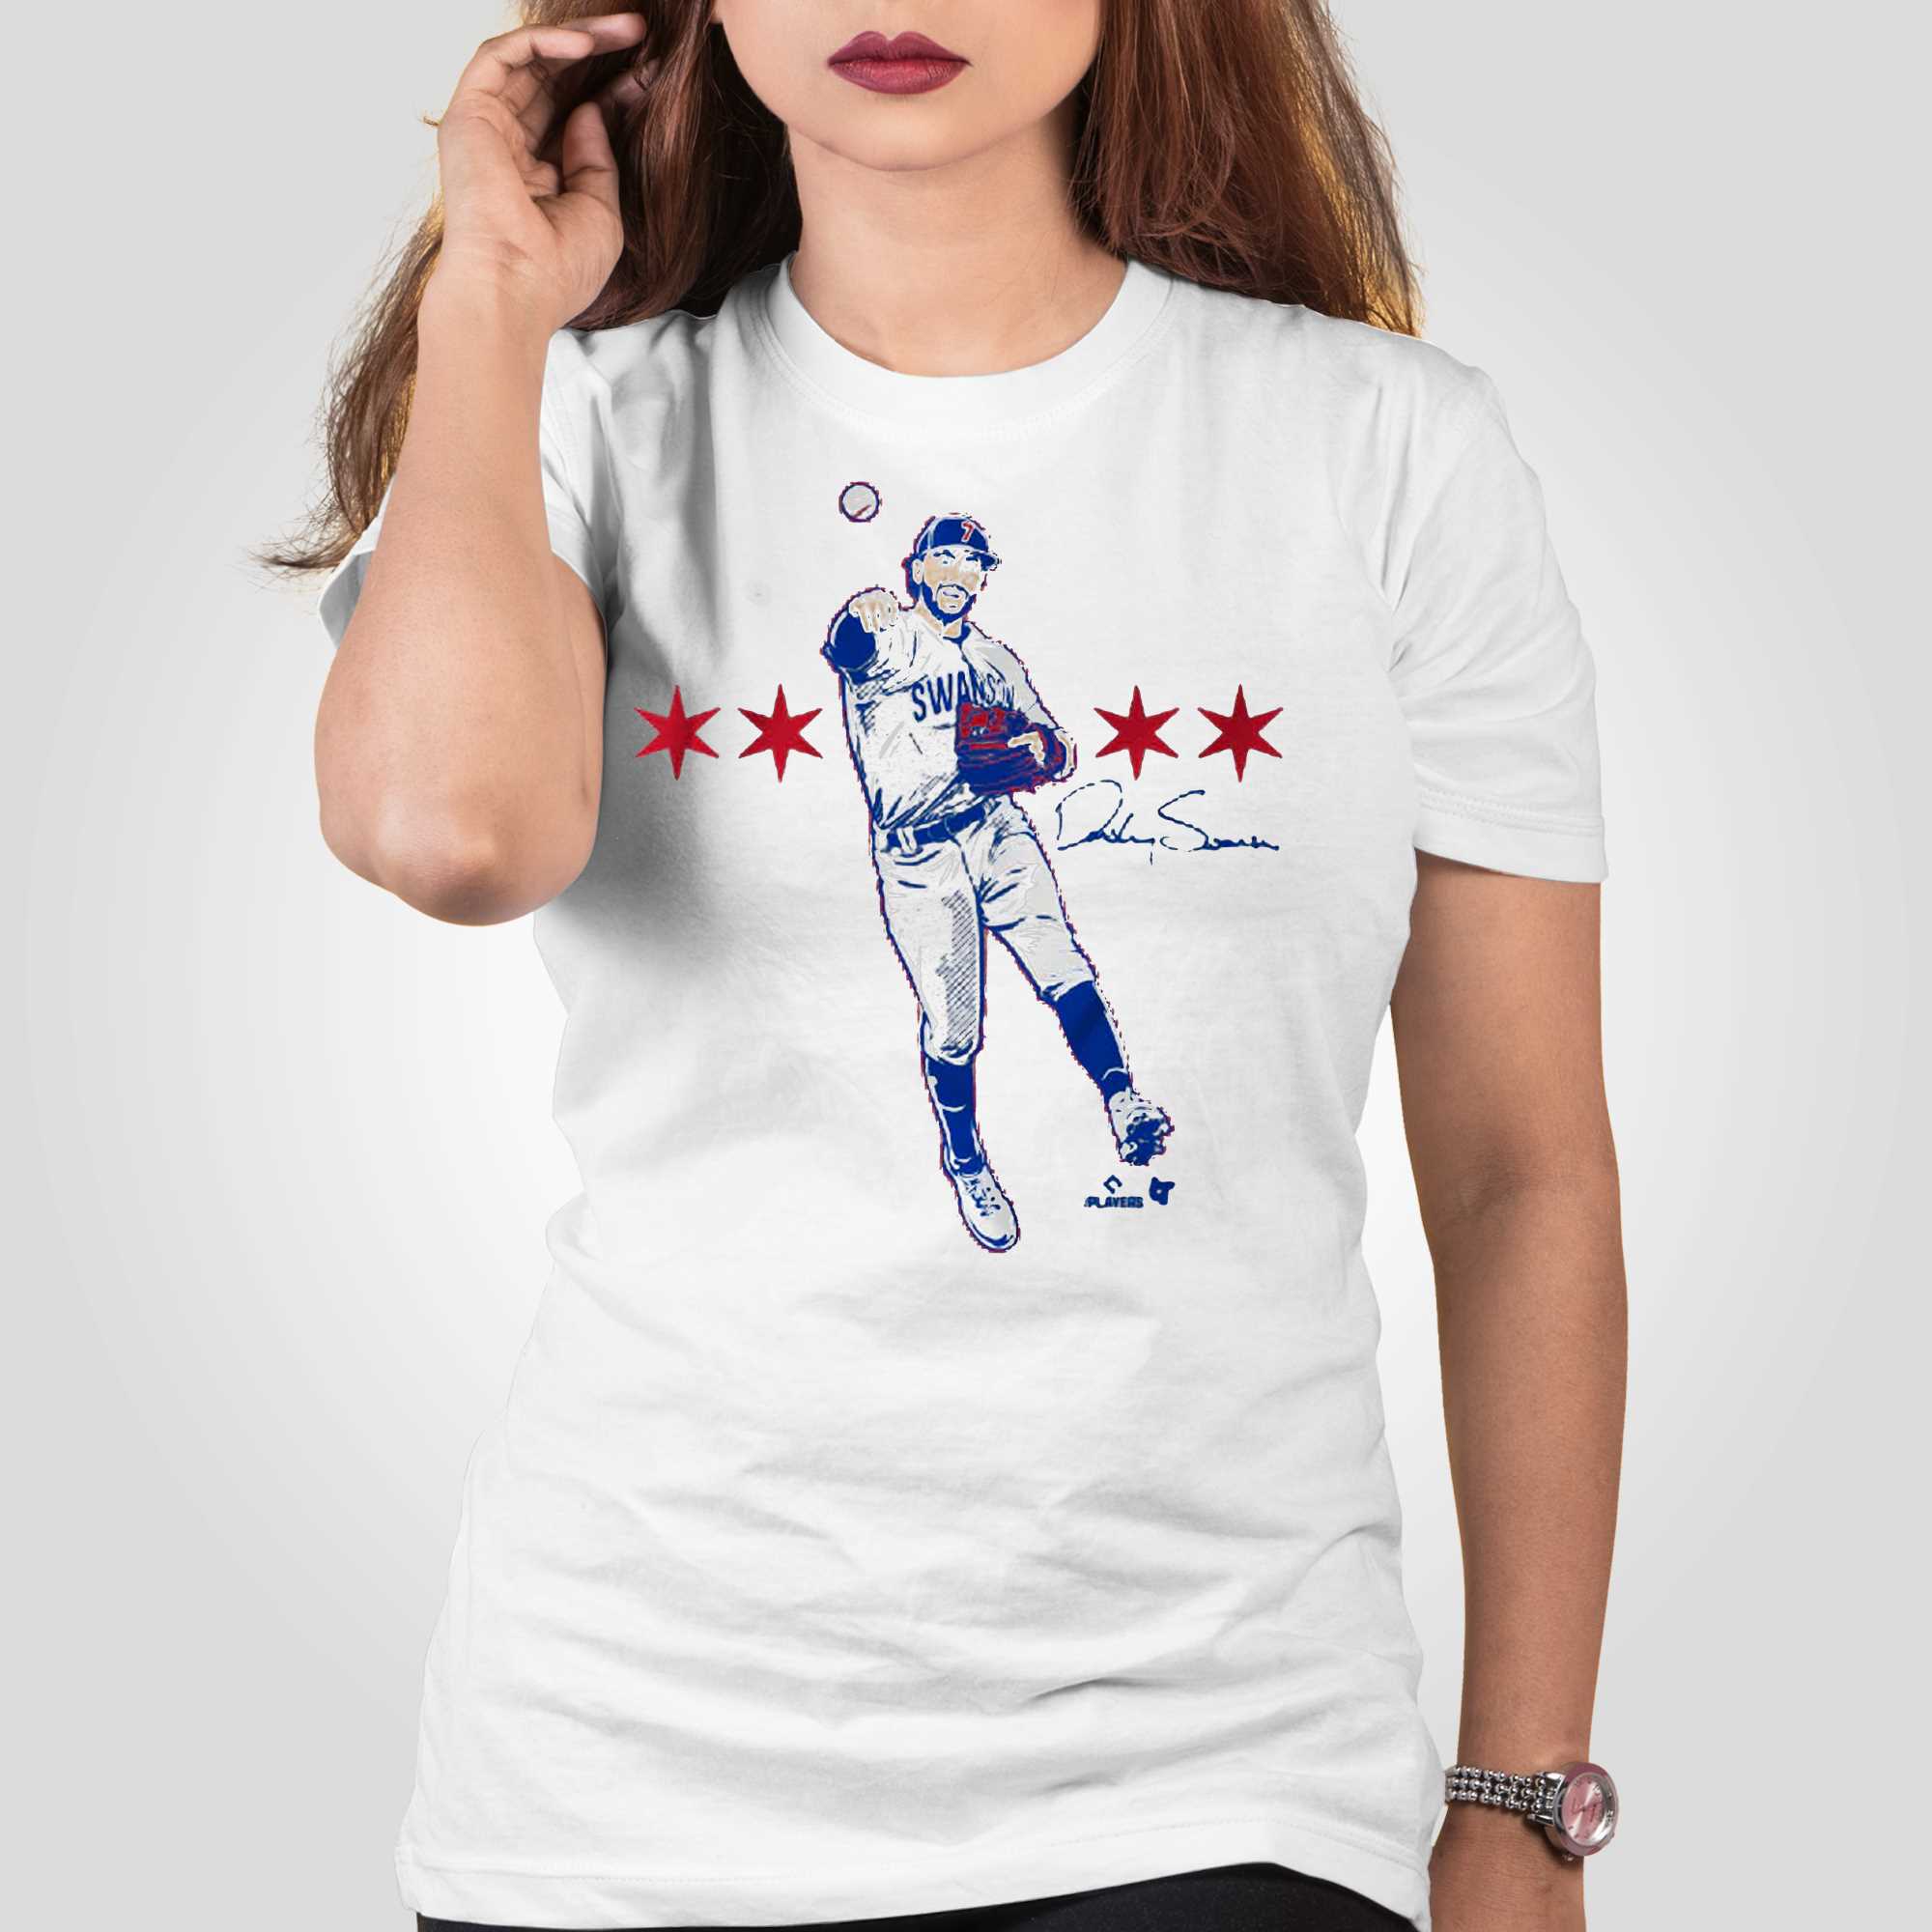 Dansby Swanson Superstar Pose Shirt - Shibtee Clothing